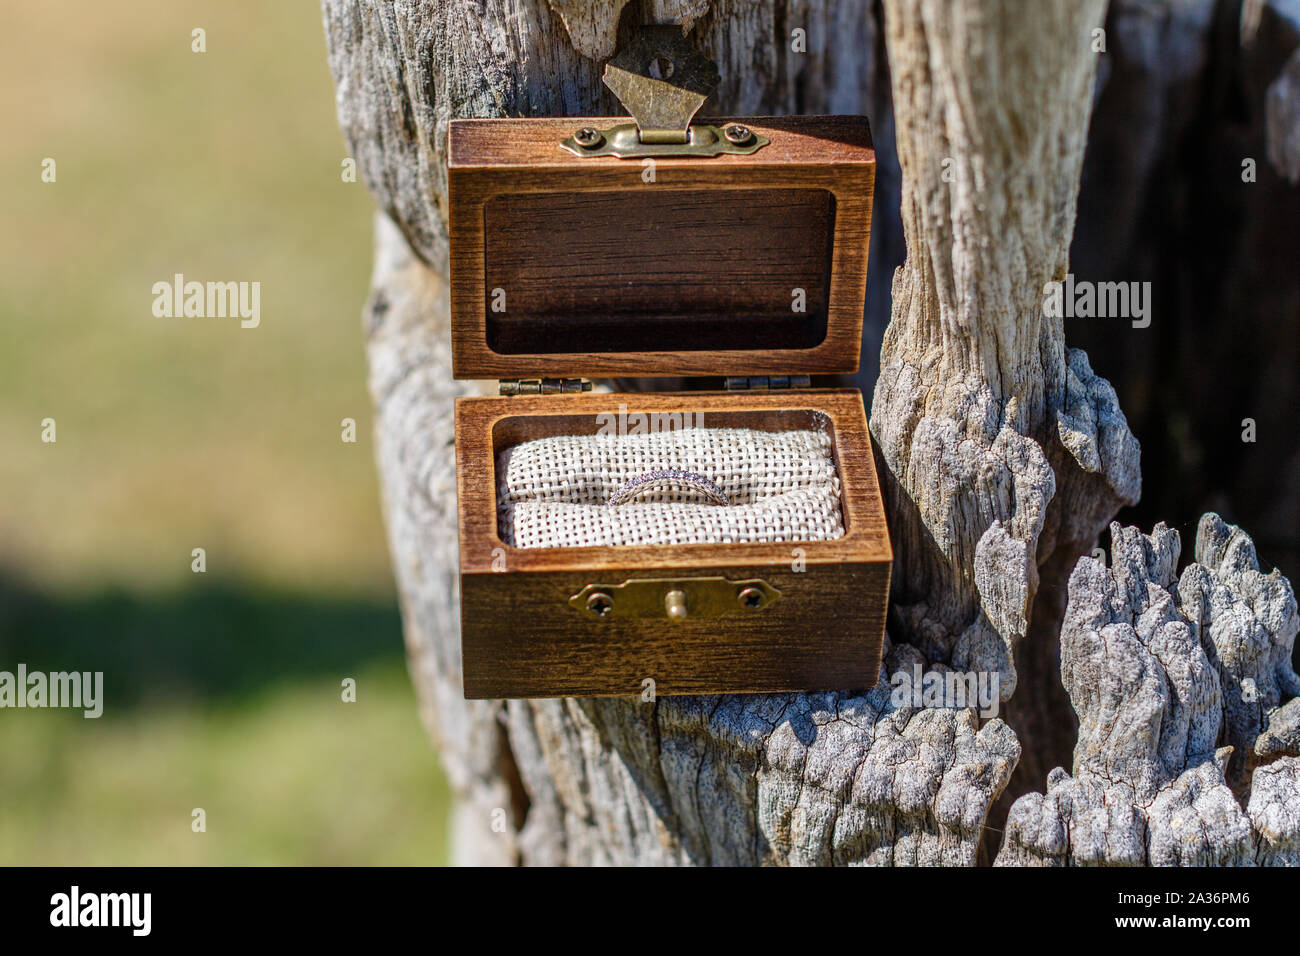 Bride white gold wedding ring with diamonds in dark wood rustic style box standing on an old tree trunk. With space. Stock Photo